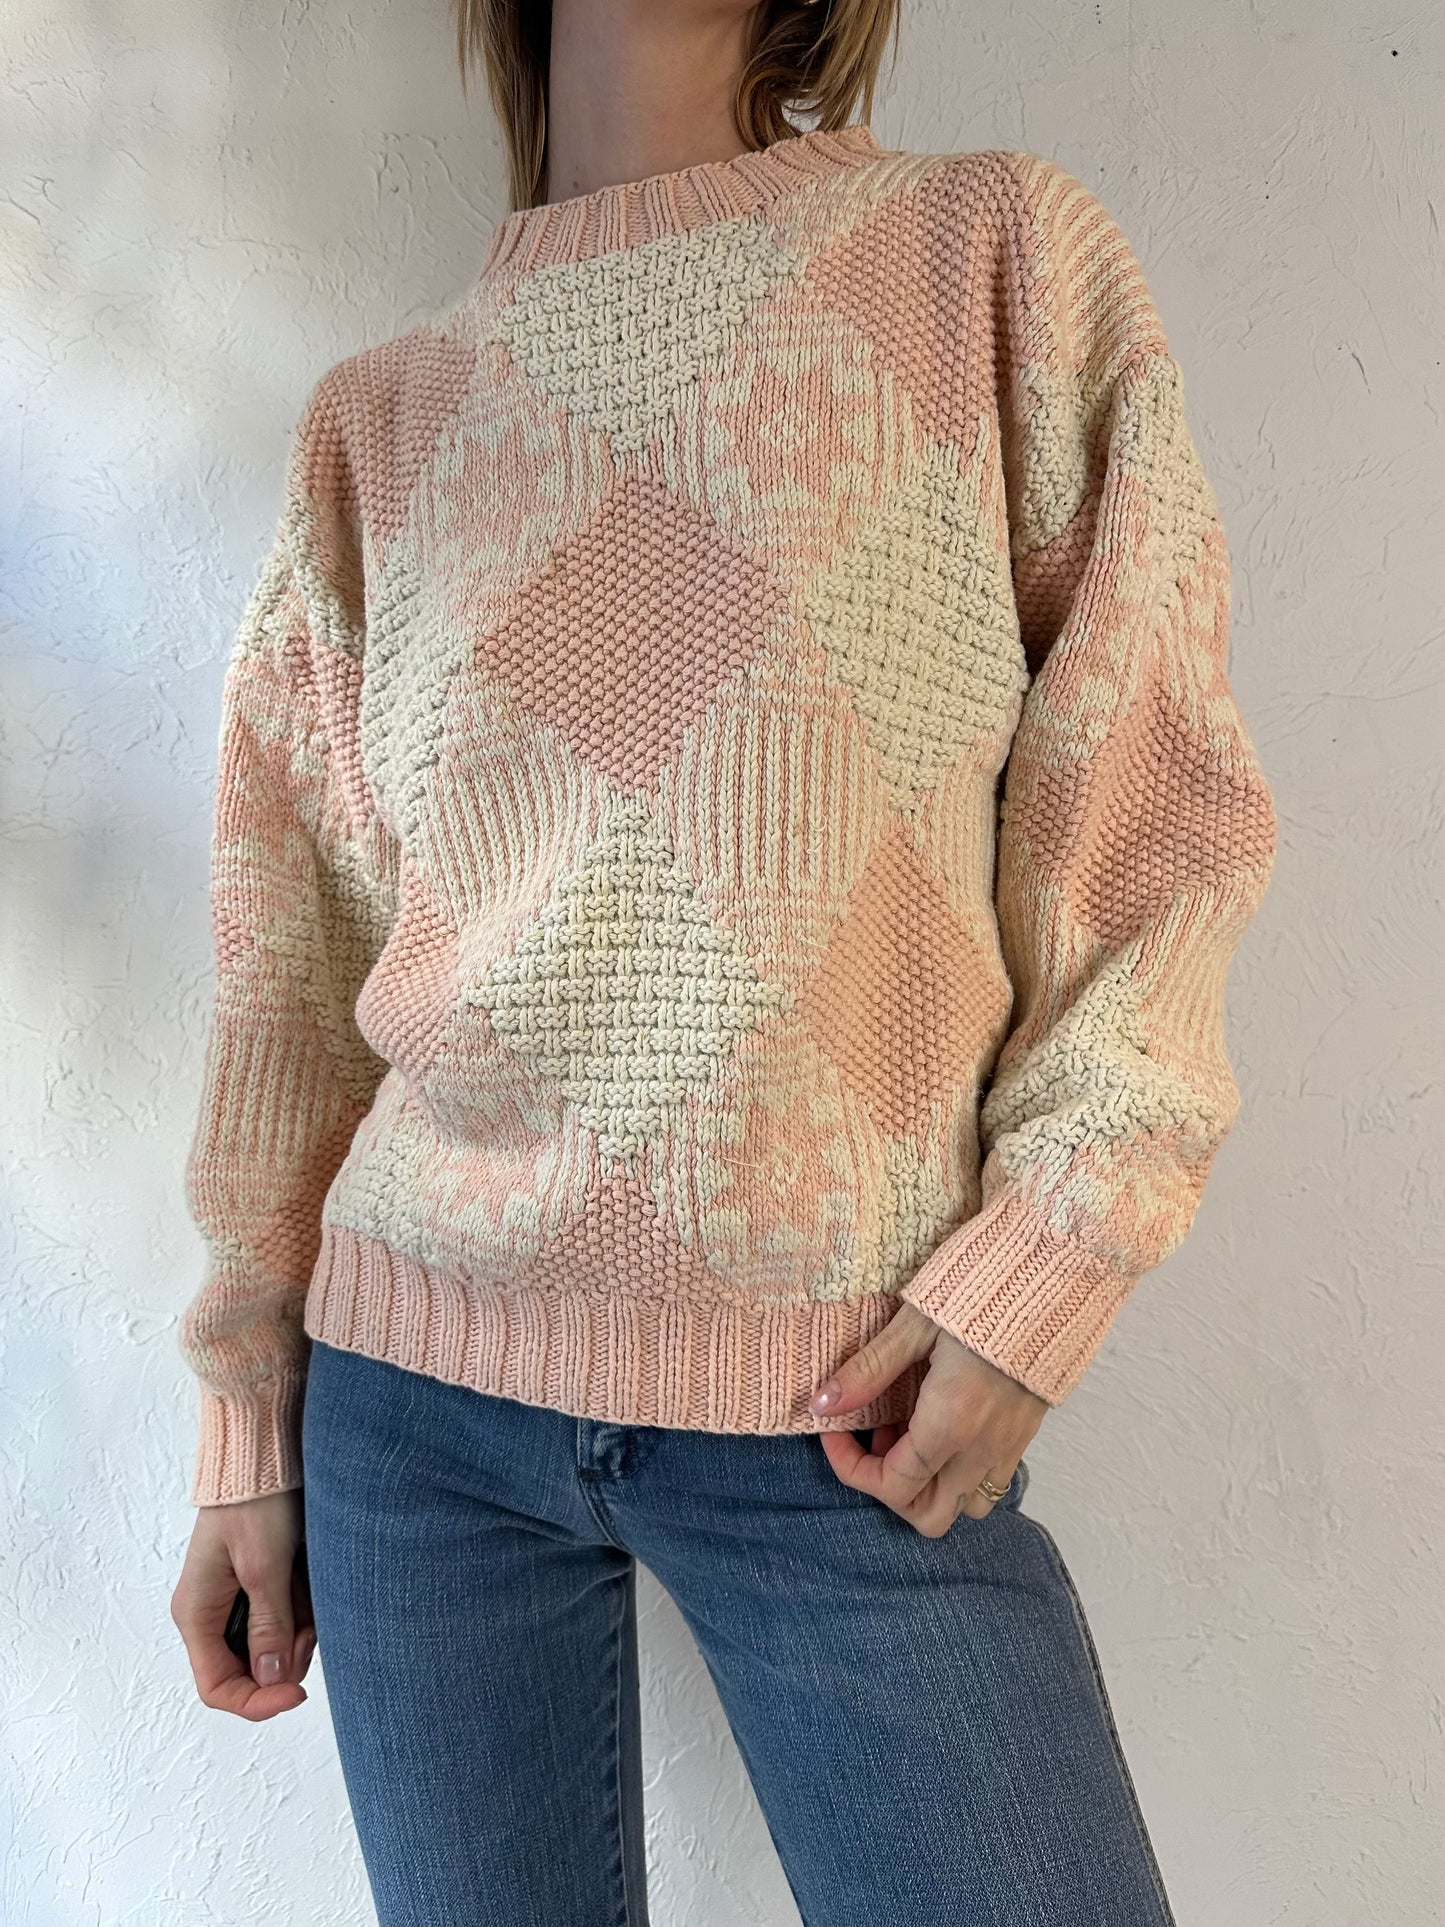 90s 'Canary Island' Thick Cotton Knit Pullover Sweater / Large